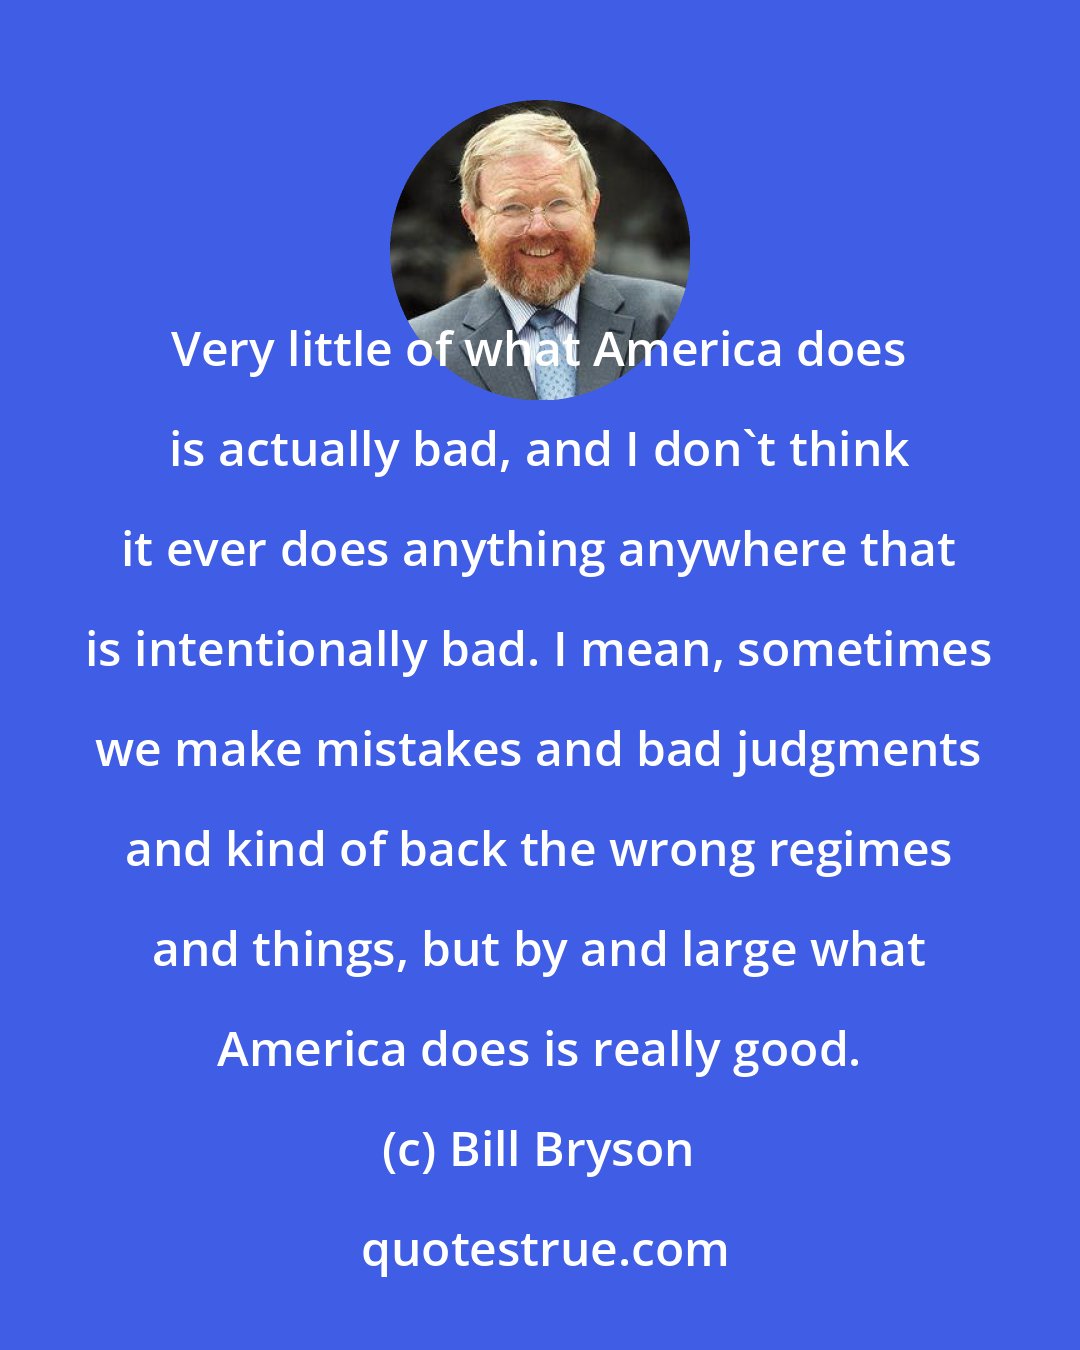 Bill Bryson: Very little of what America does is actually bad, and I don't think it ever does anything anywhere that is intentionally bad. I mean, sometimes we make mistakes and bad judgments and kind of back the wrong regimes and things, but by and large what America does is really good.